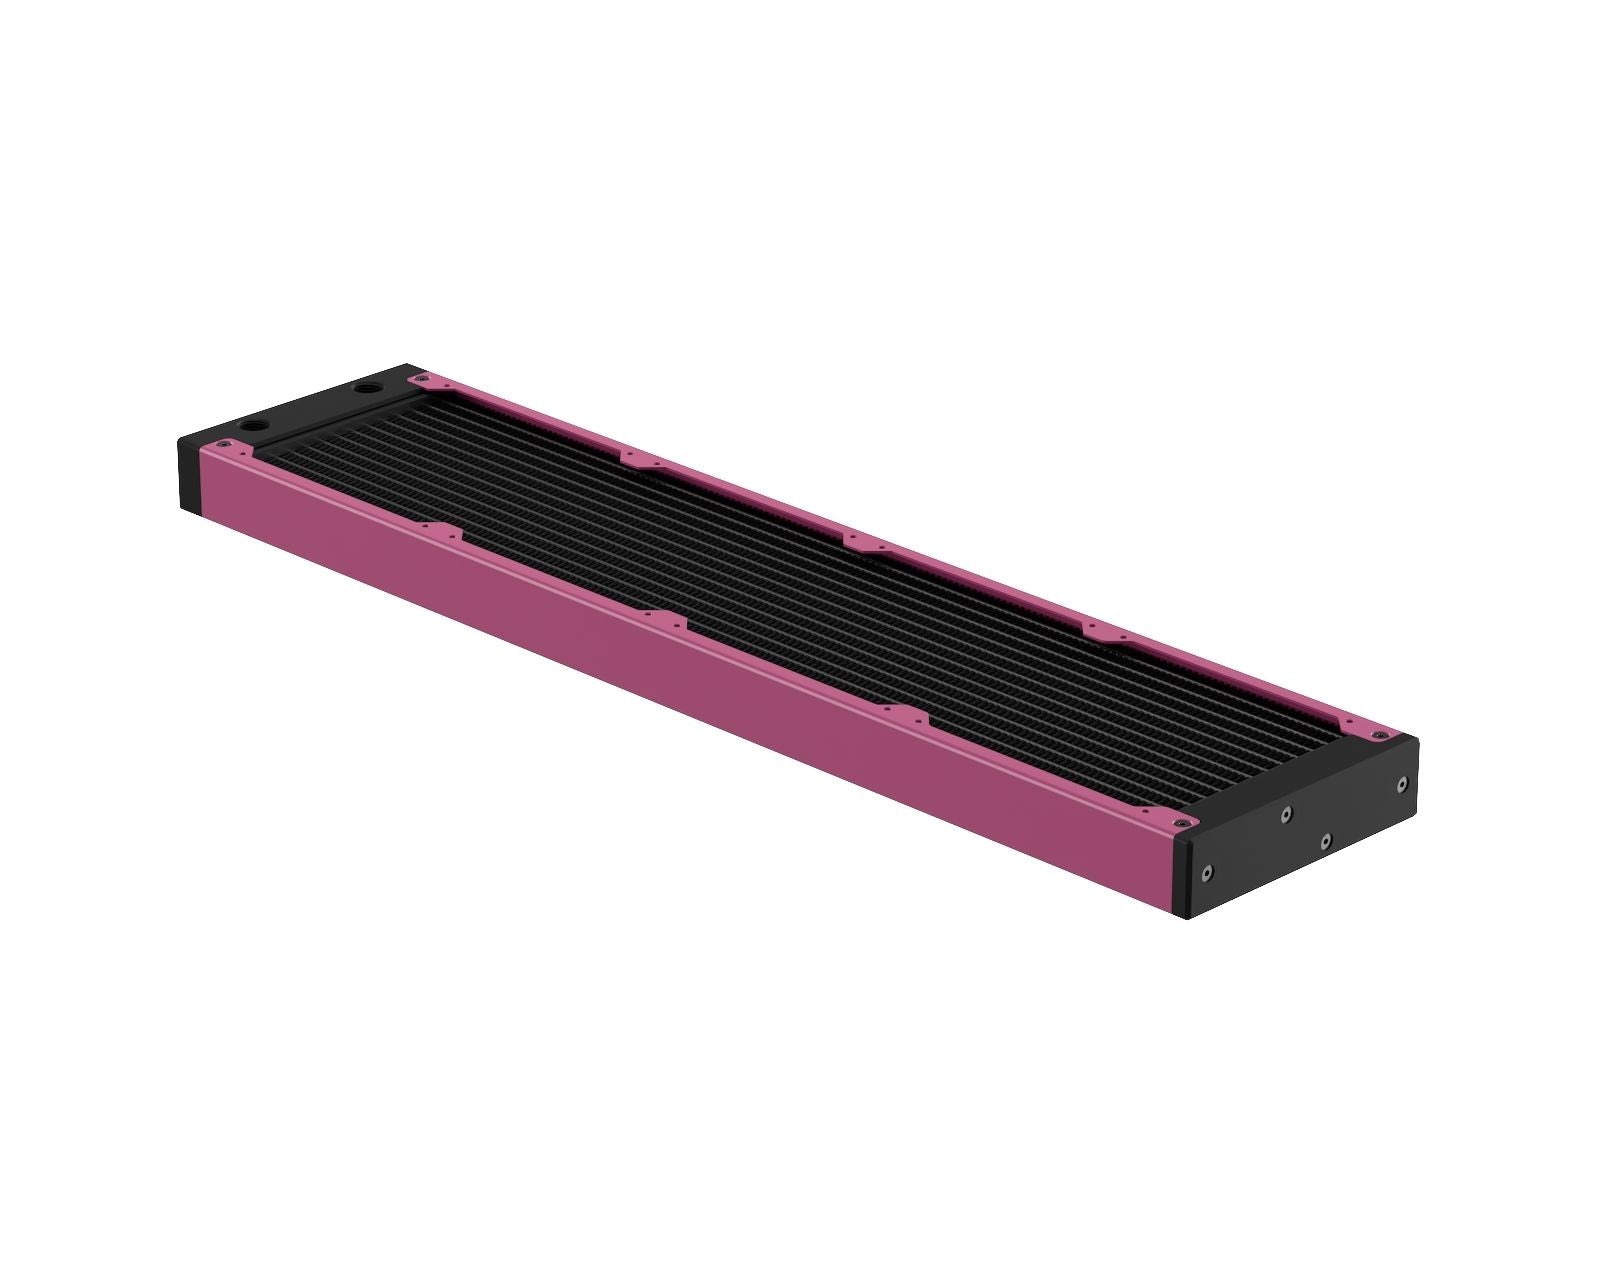 PrimoChill 480SL (30mm) EXIMO Modular Radiator, Black POM, 4x120mm, Quad Fan (R-SL-BK48) Available in 20+ Colors, Assembled in USA and Custom Watercooling Loop Ready - Magenta